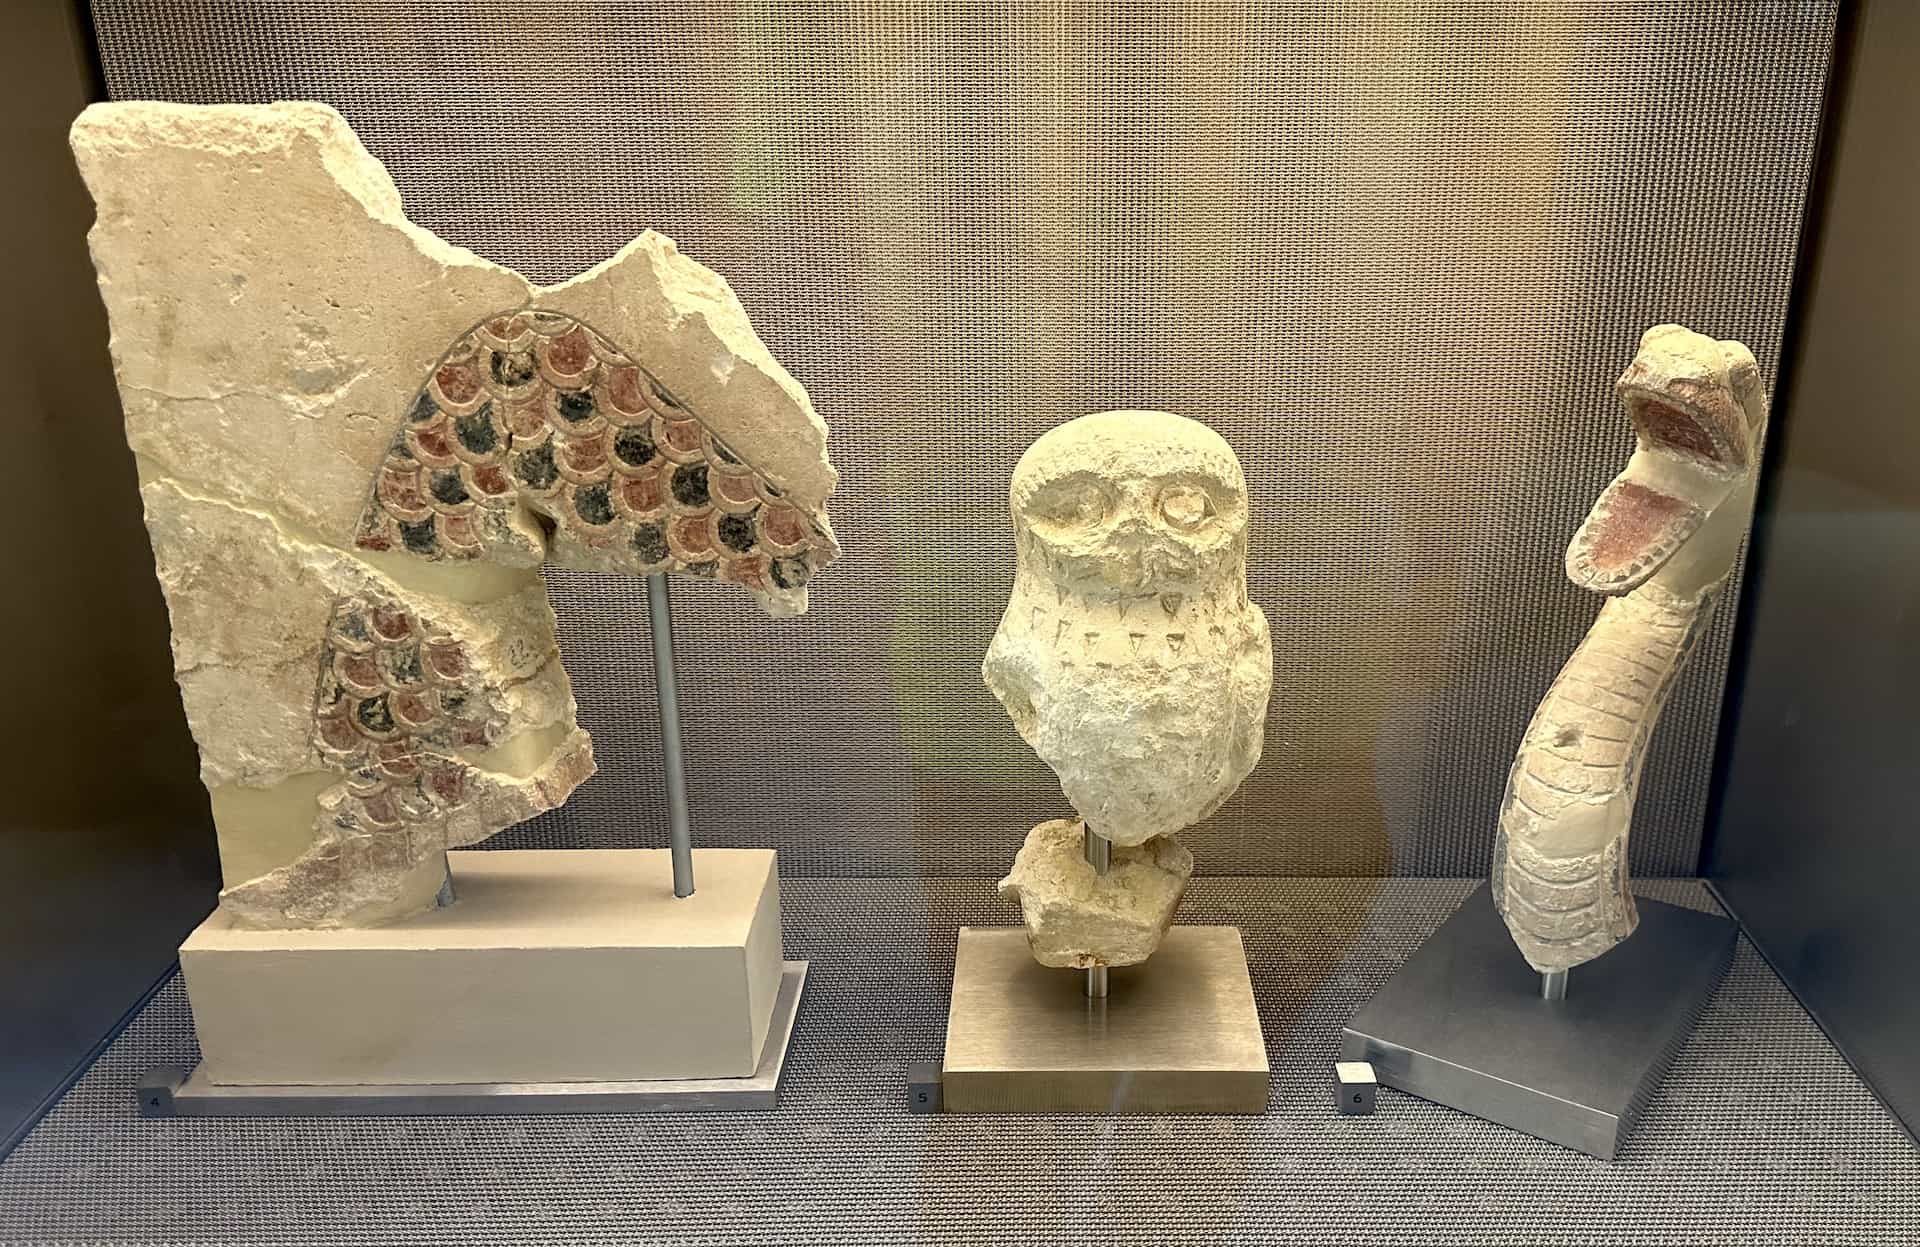 Fragments of the cornice (left) and owl and snake sculptures (center and right) from the Hekatompedon